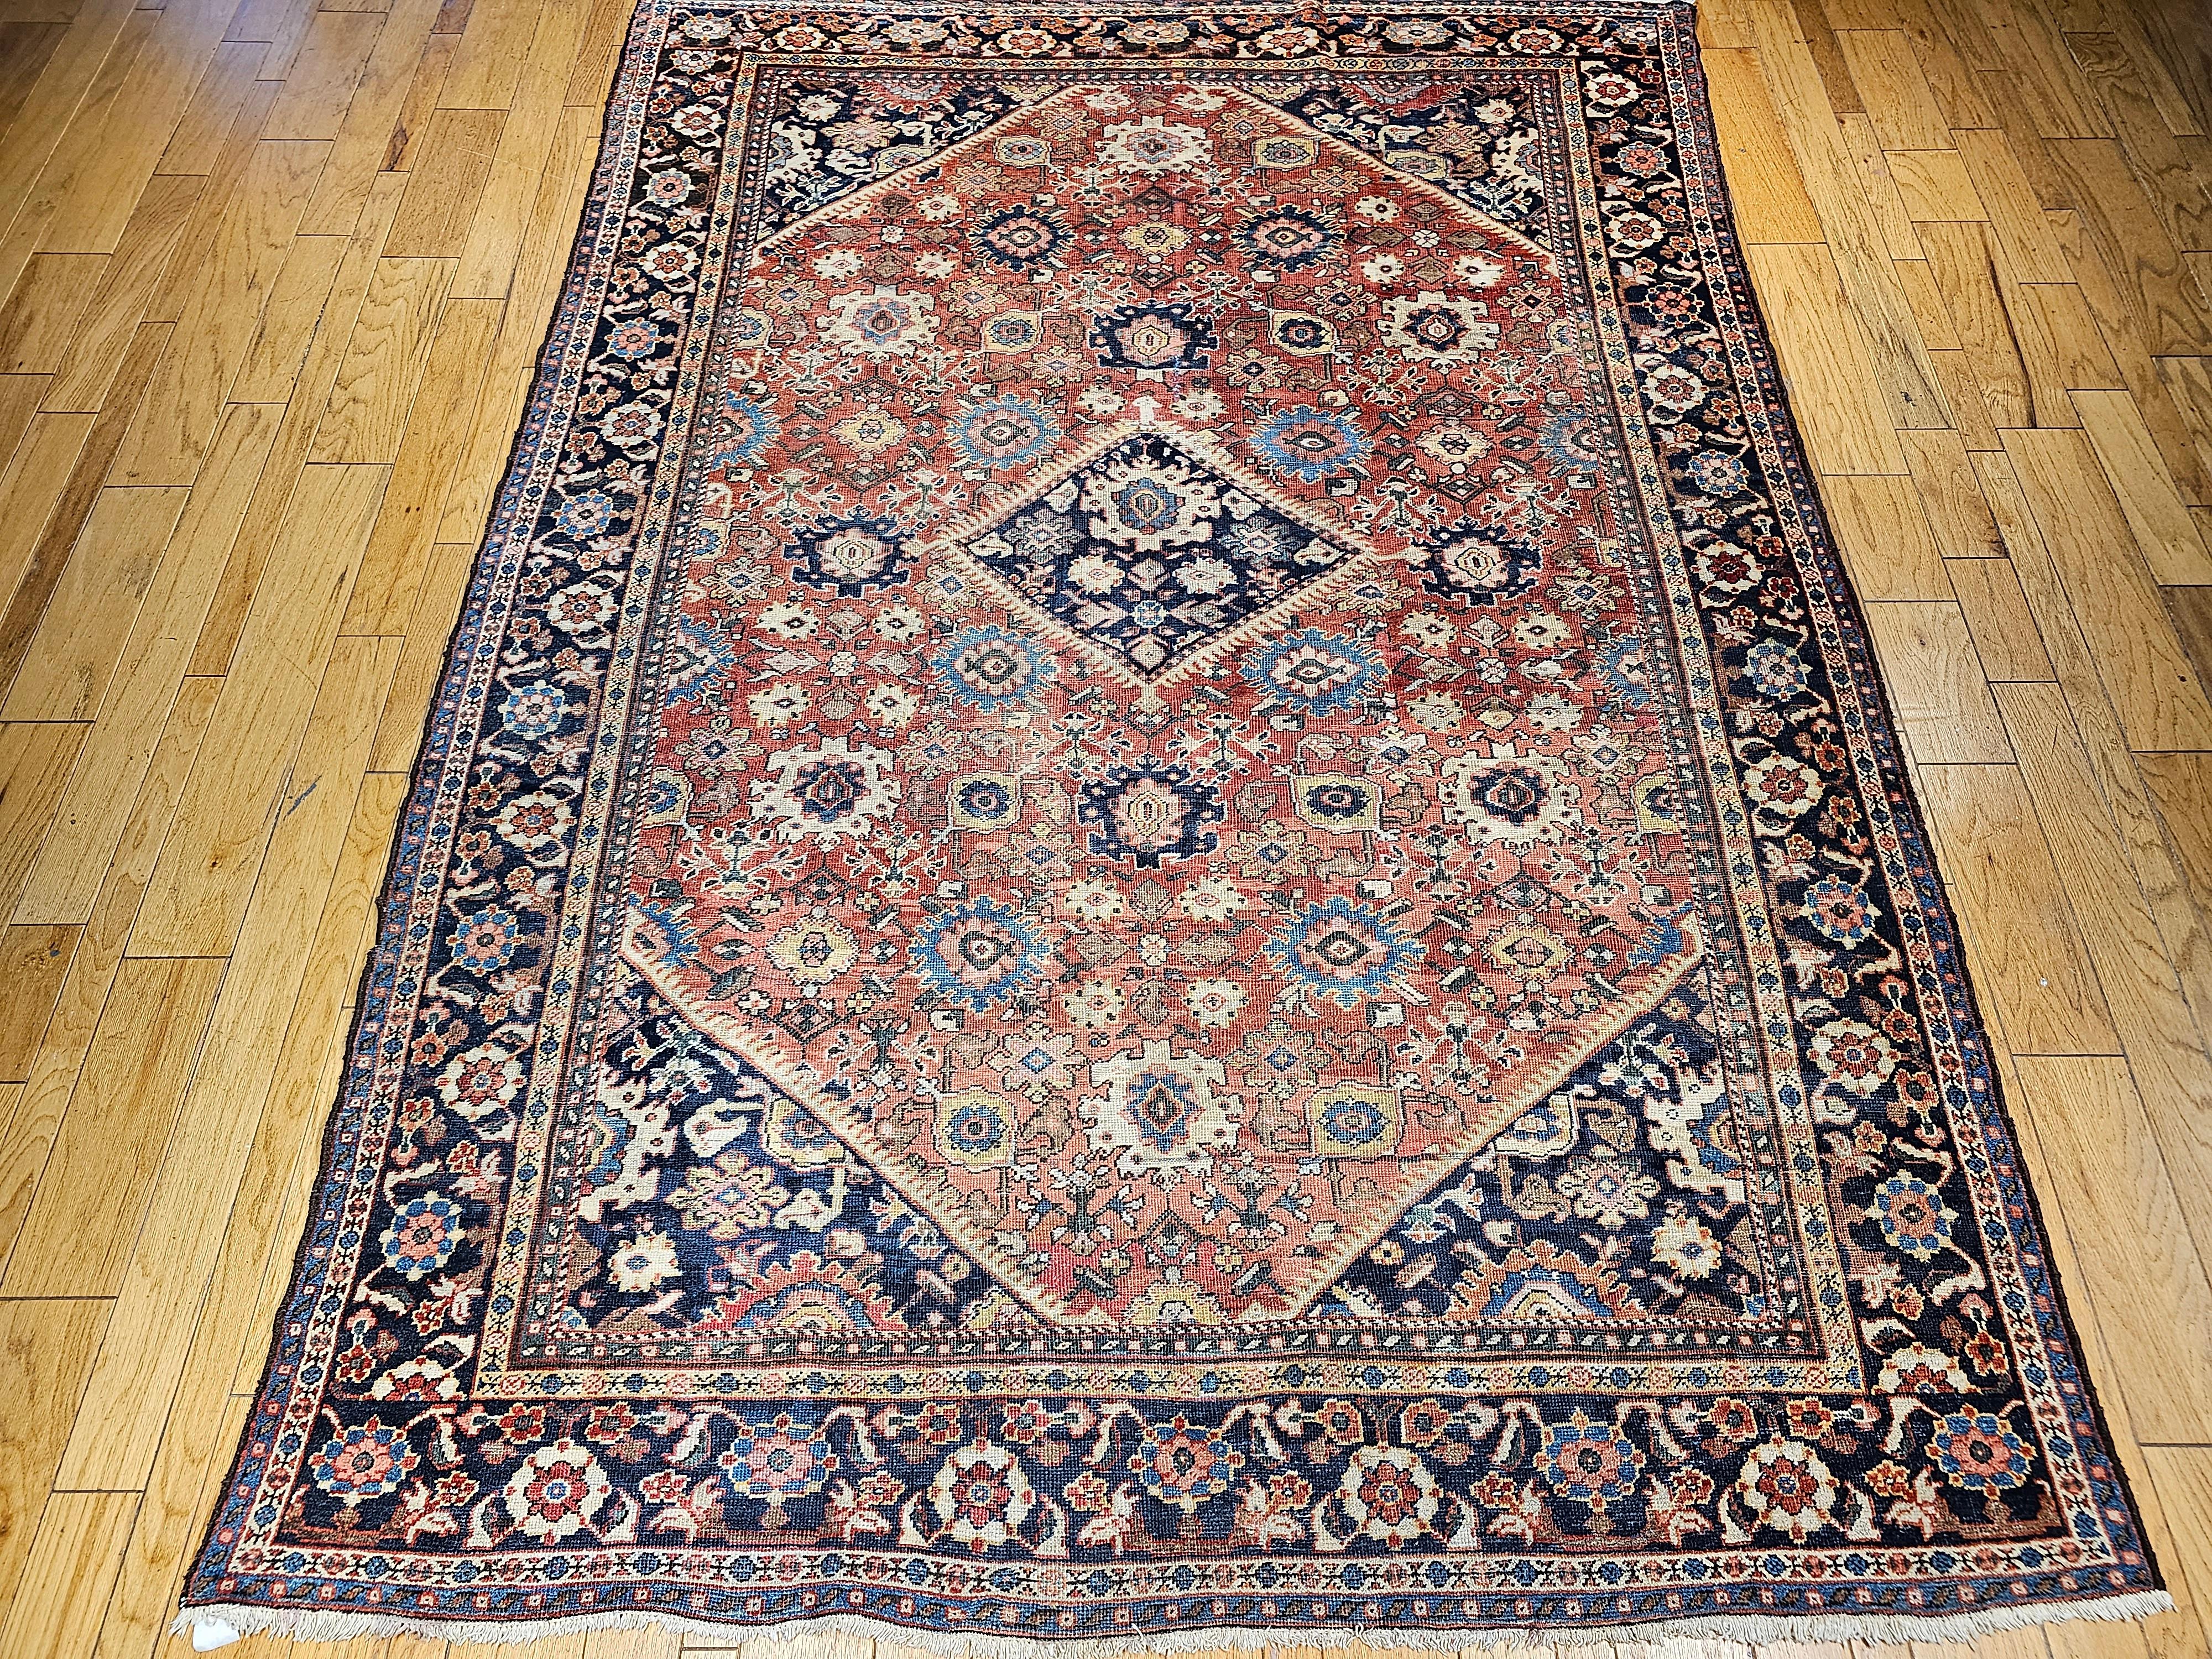 The Ziegler Mahal Sultanabad rugs are world renowned for their ageless beauty. This antique Mahal Sultanabad from the late 19th century has an overall design with a rust field and blue border. The large forms in white, blue, pink, and yellow